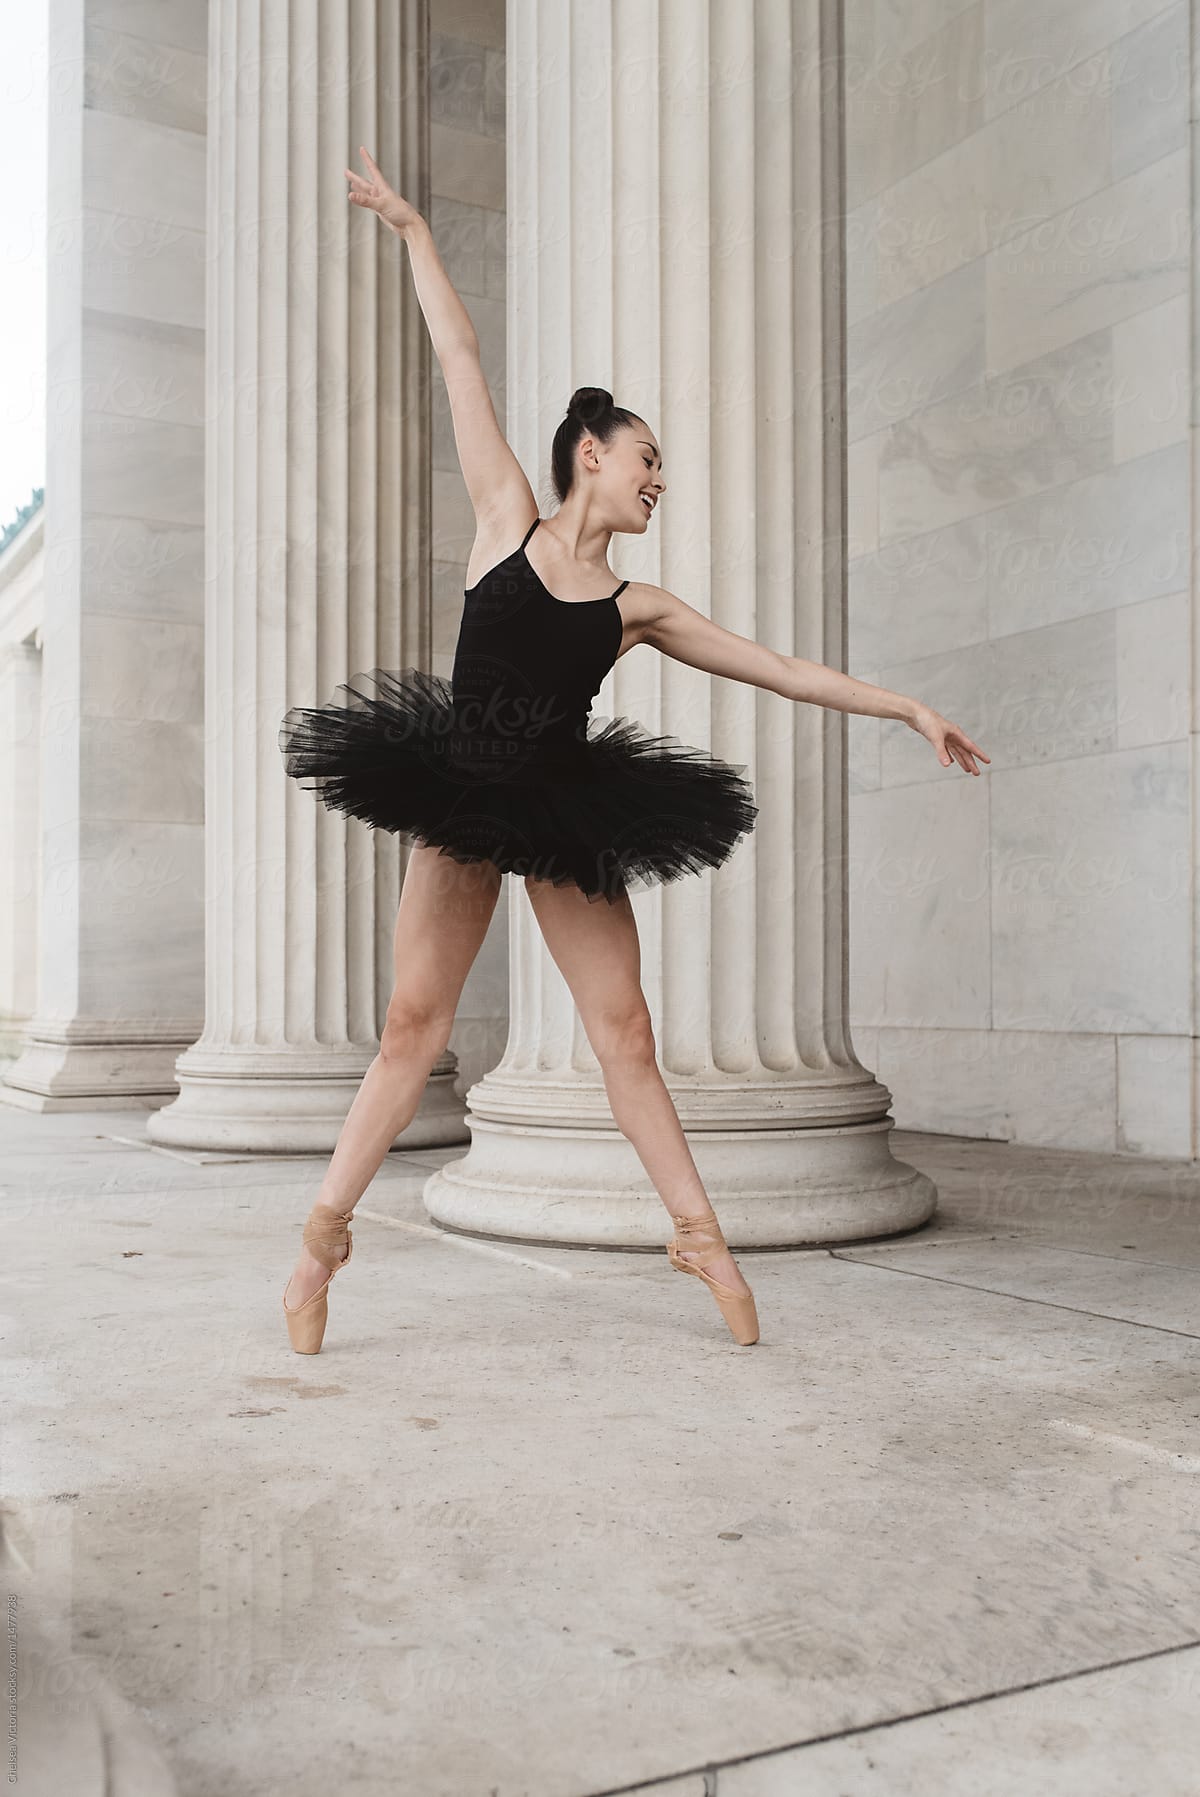 A Preteen Ballerina In Different Dance Poses by Stocksy Contributor  Chelsea Victoria - Stocksy